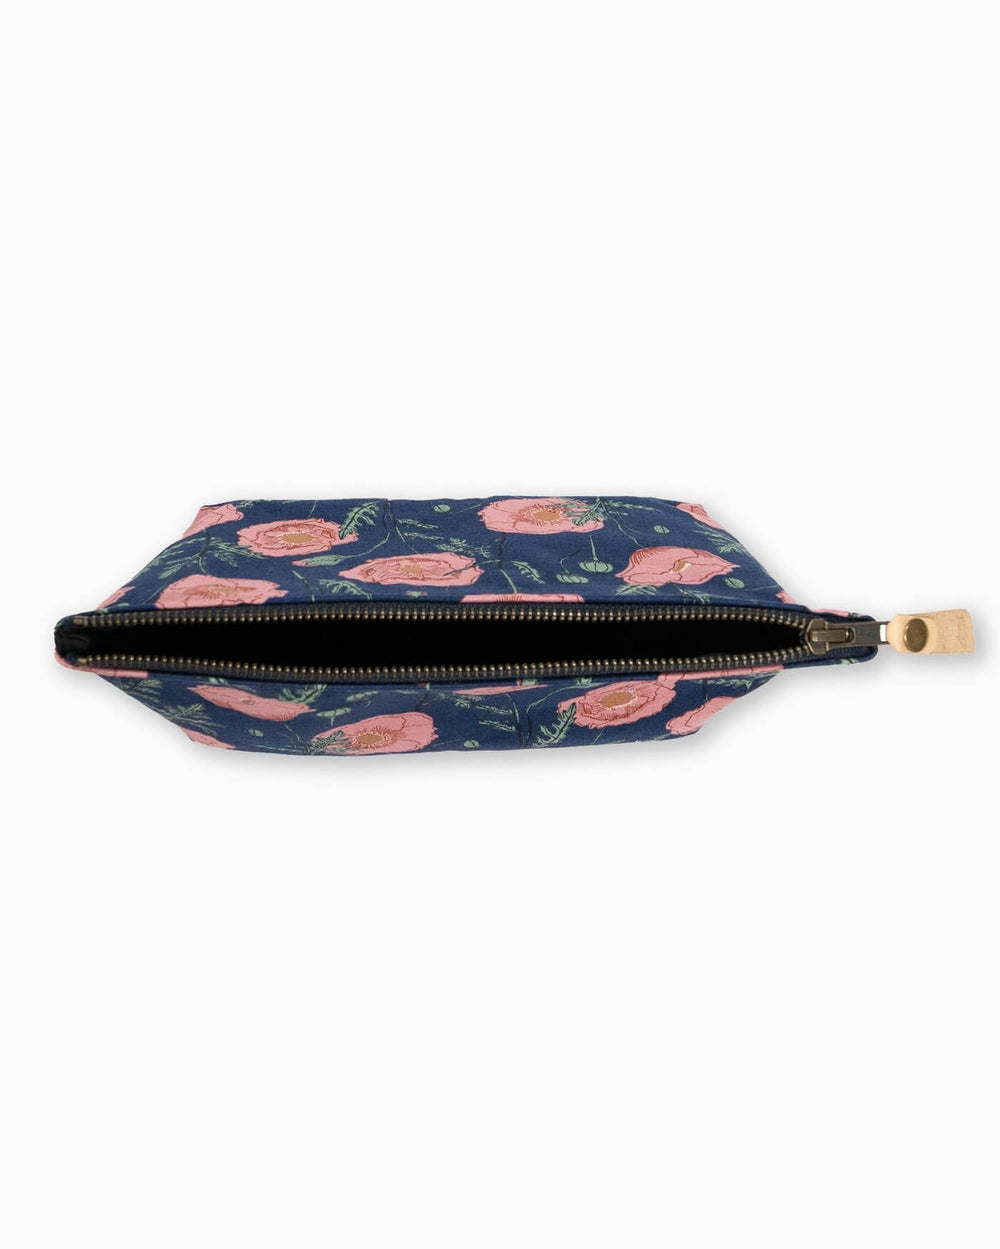 The detail view of the Southern Tide Floral Travel Clutch by Southern Tide - Navy